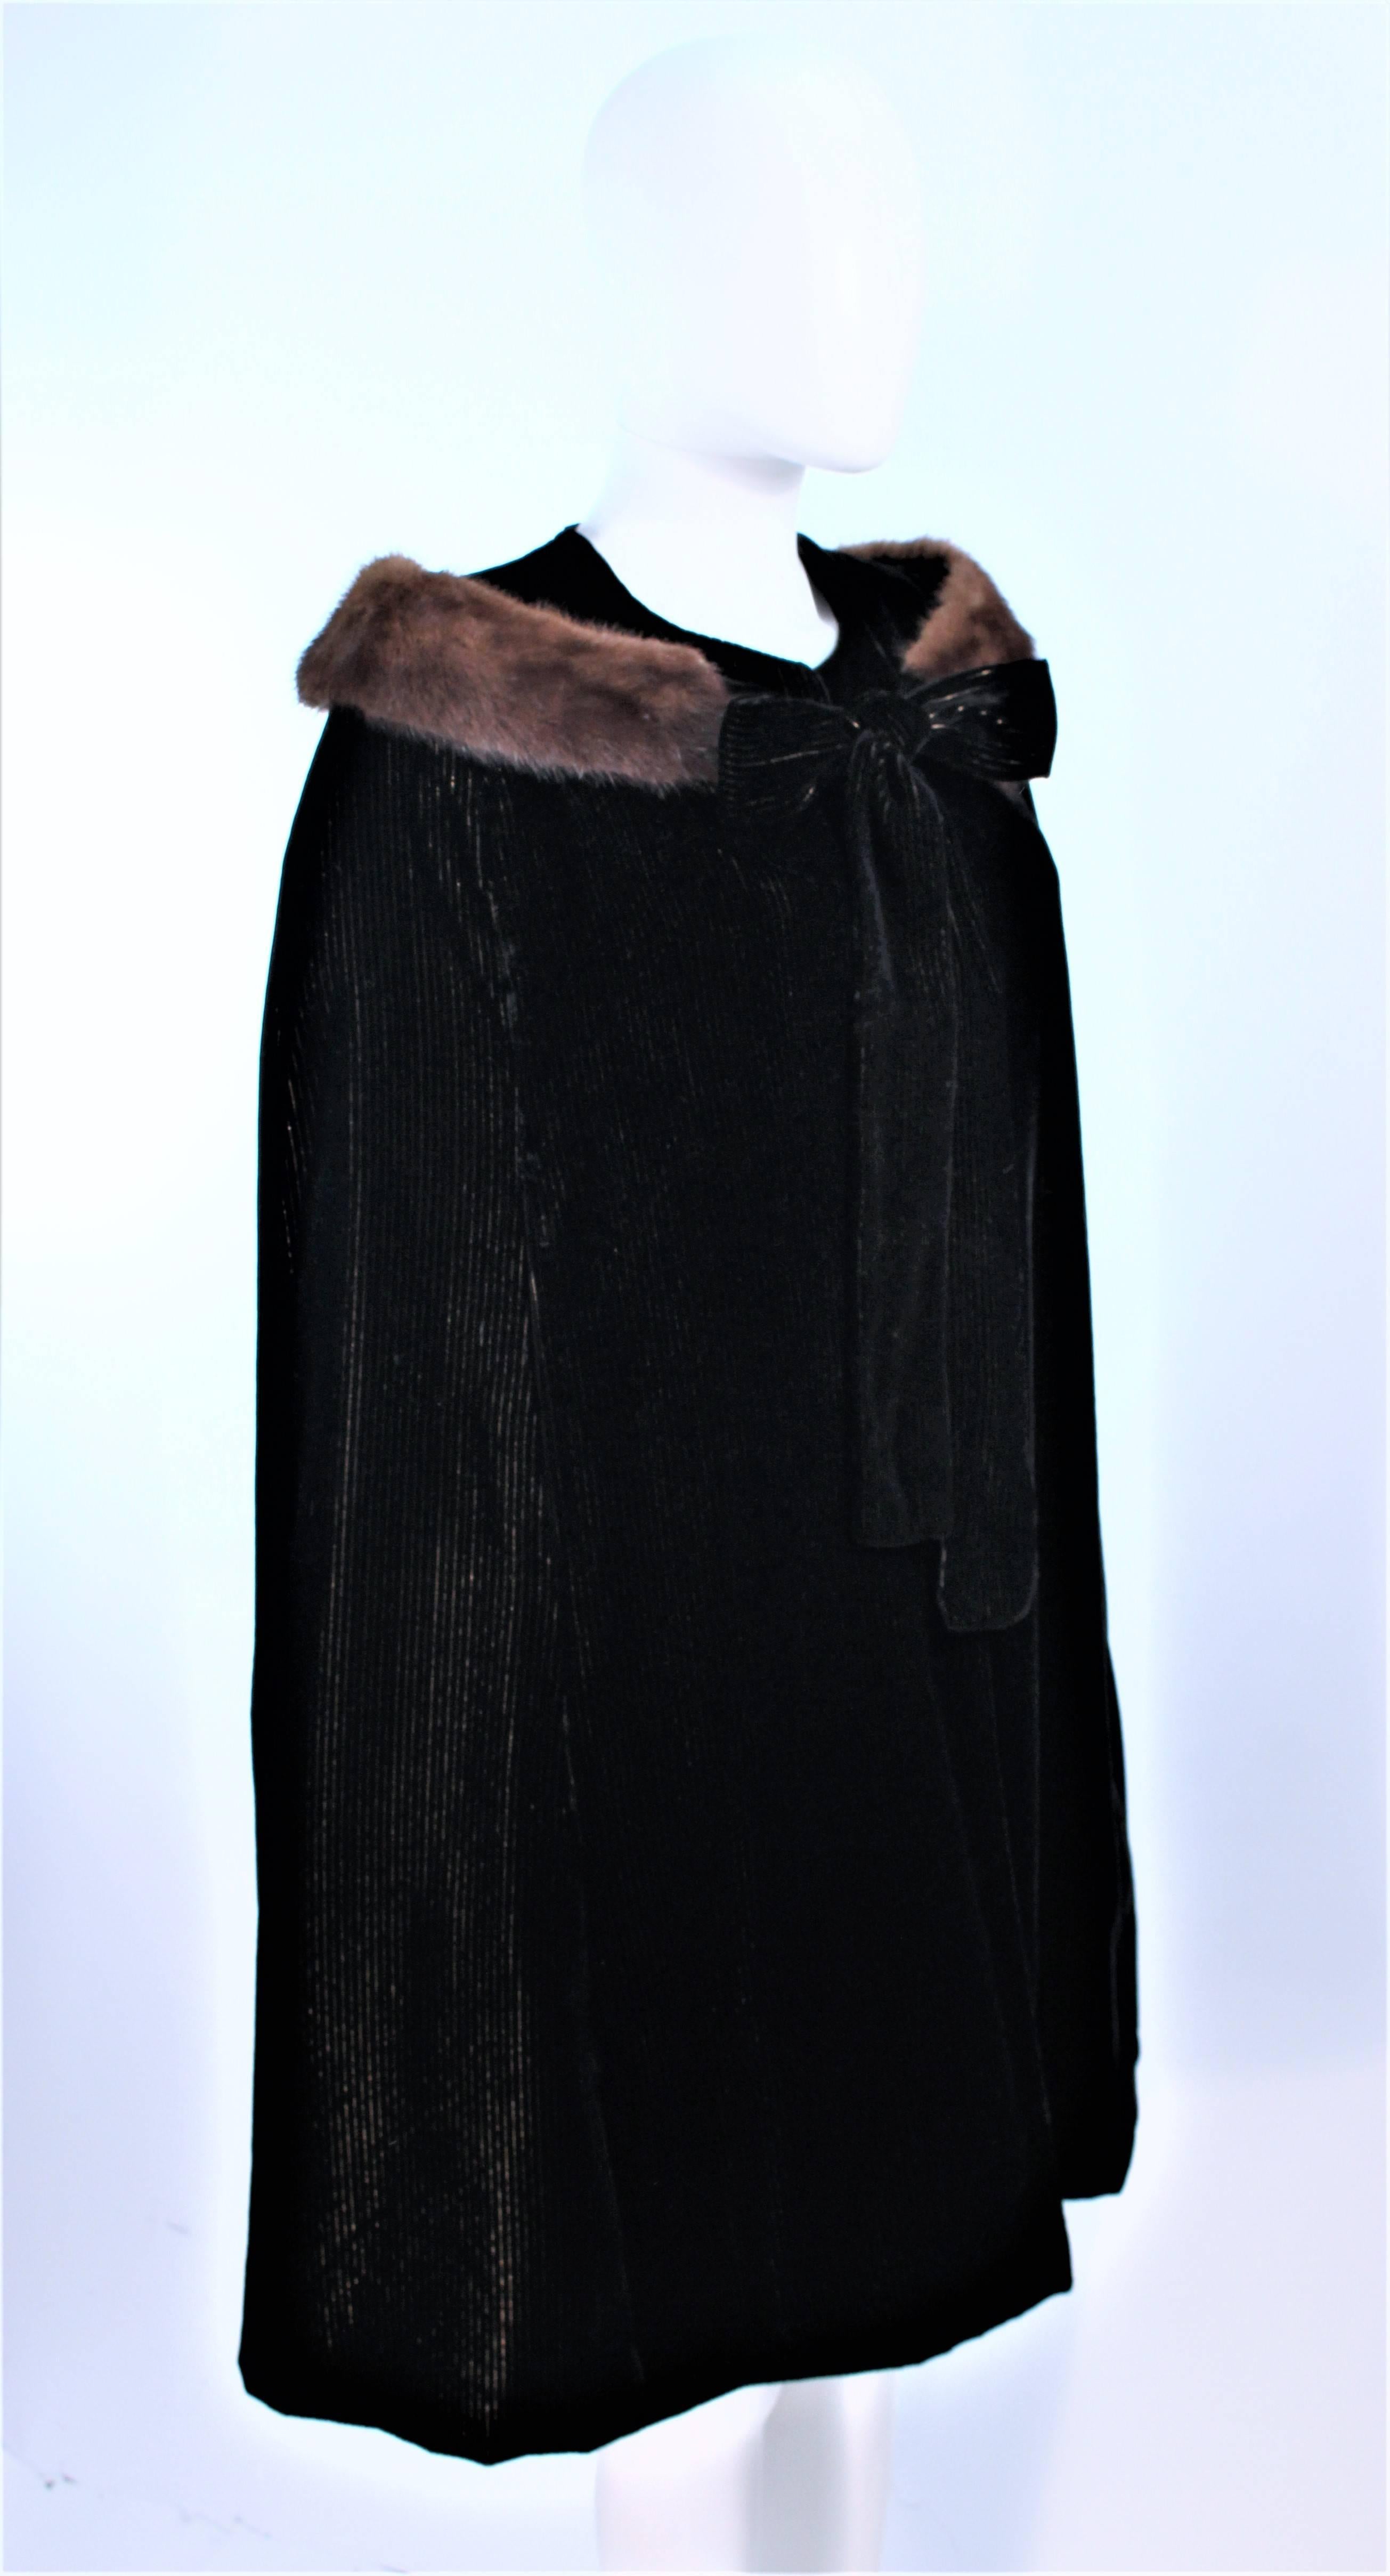 Vintage 1950's Black Metallic Velvet Cape with Mink Trim Size Medium Large In Excellent Condition For Sale In Los Angeles, CA